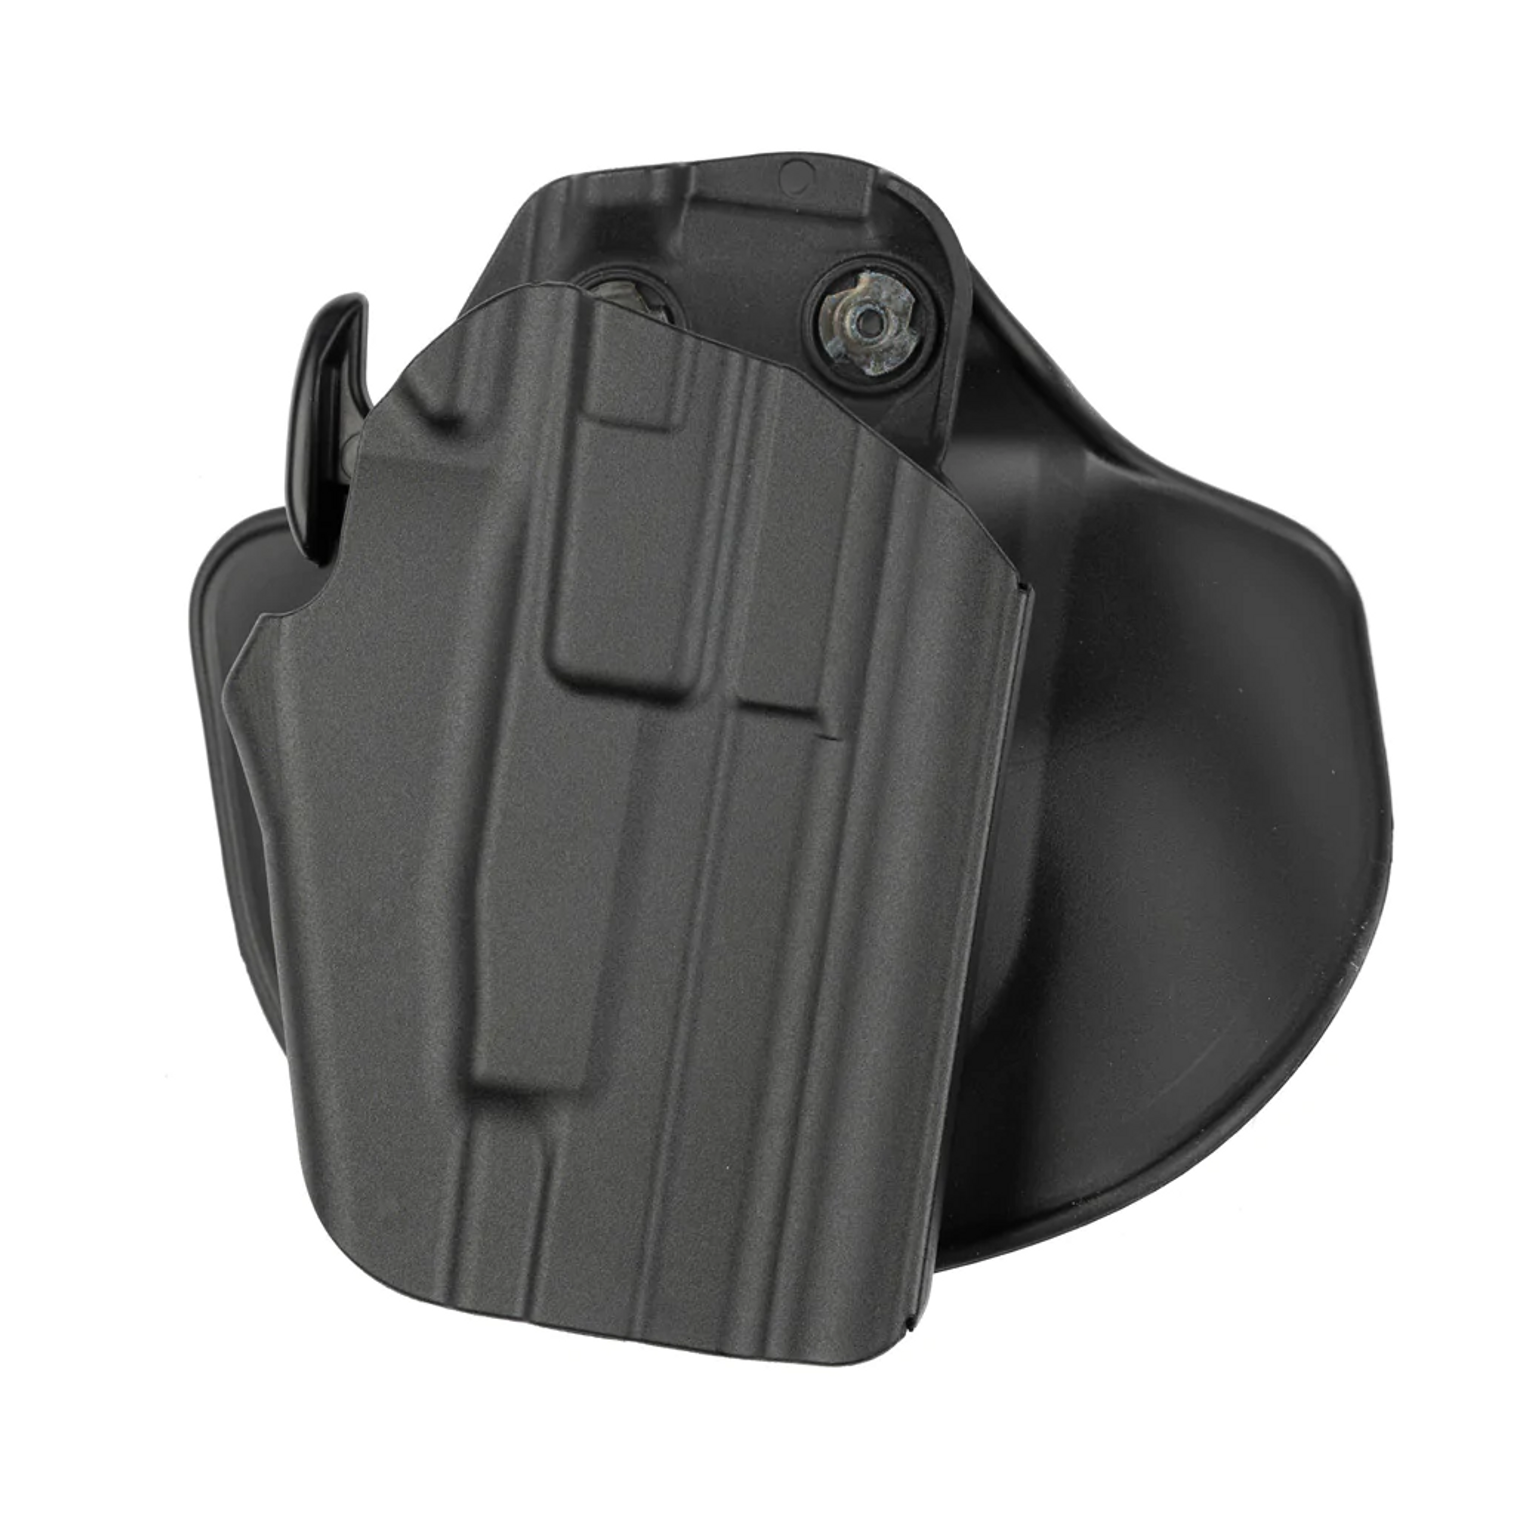 Model 578 Gls Pro-fit Holster, Paddle & Belt Loop Combo For Springfield Xd-s 9